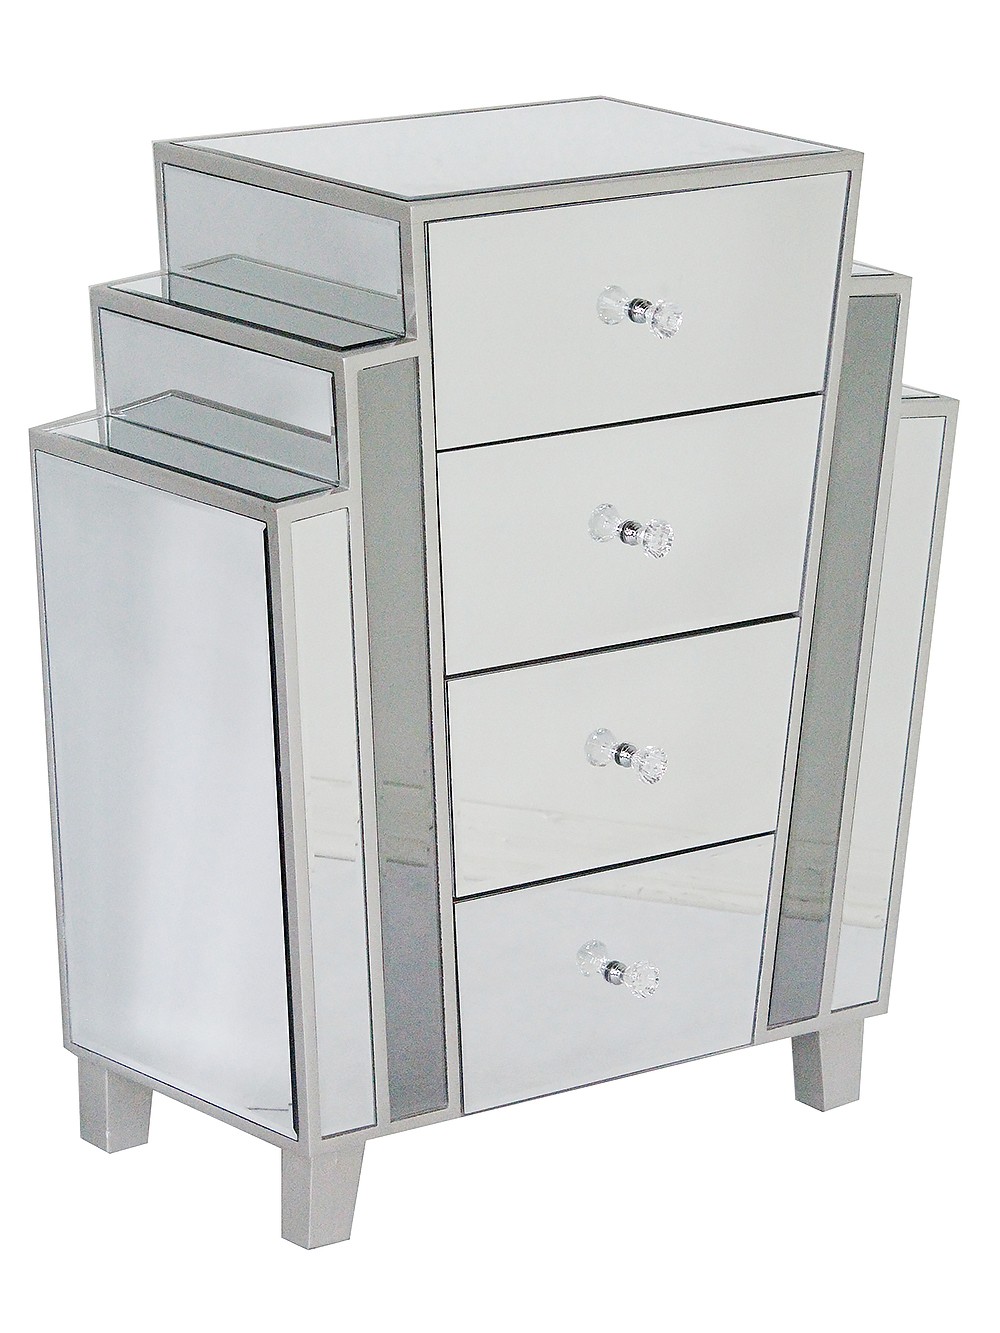 Natural MDF Wood Mirrored Glass Accent Cabinet with Drawers